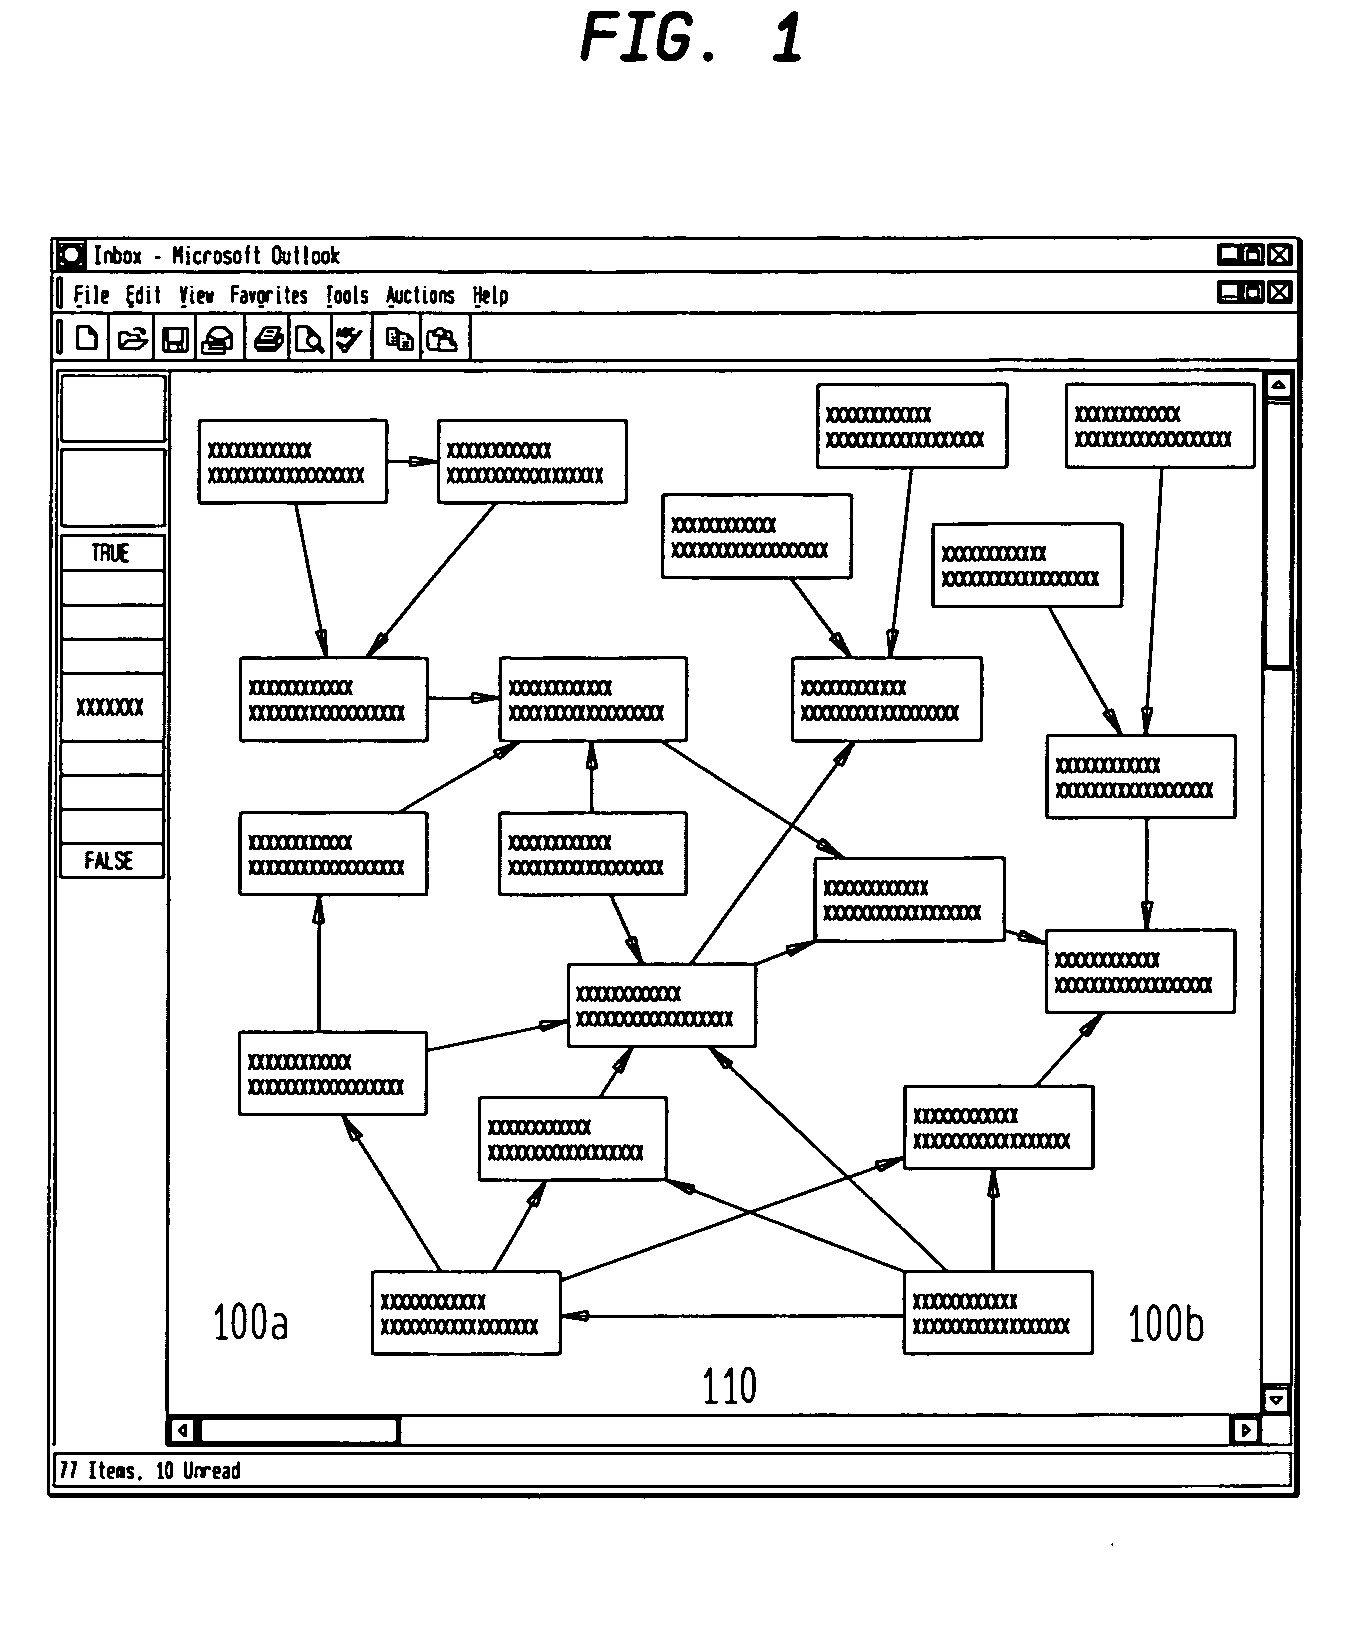 System and method for consensus-based knowledge validation, analysis and collaboration